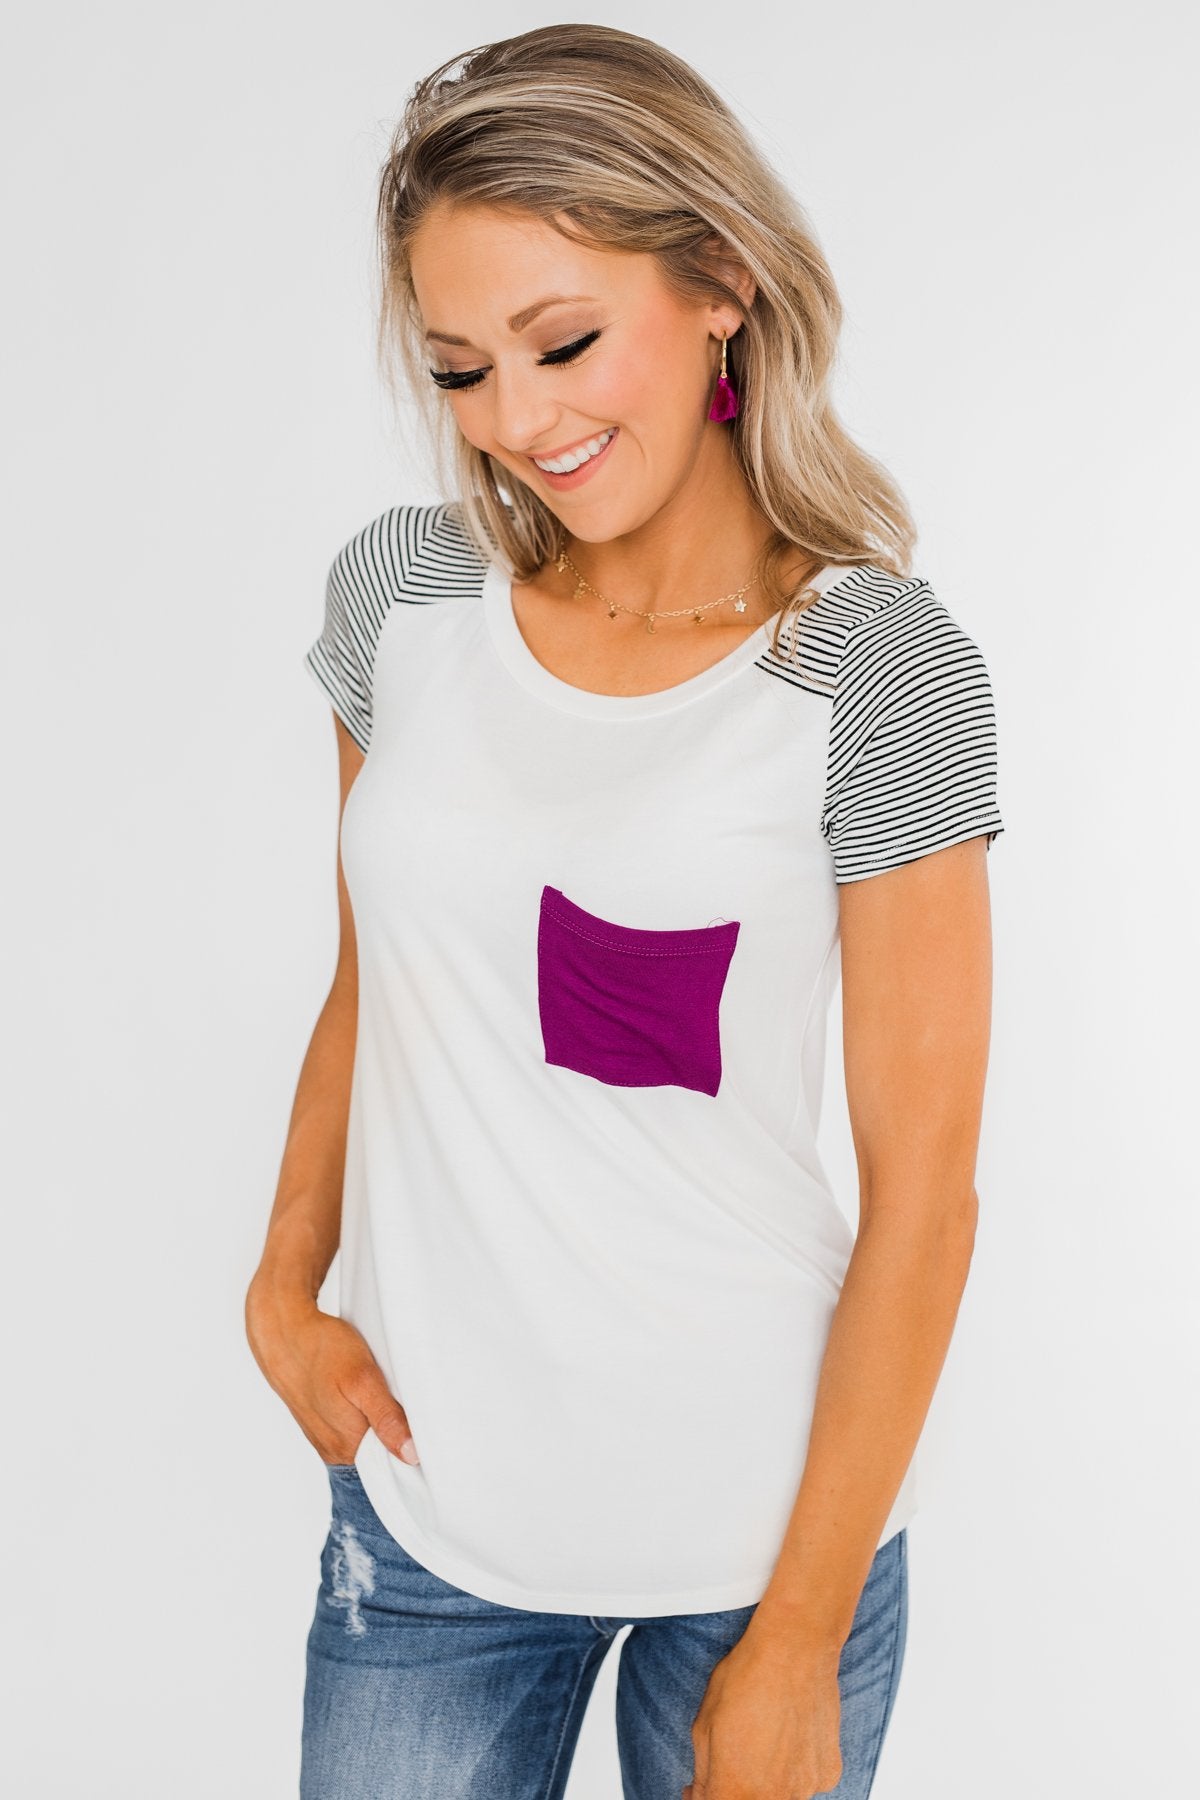 Take Me There Striped Sleeve Pocket Top- Magenta